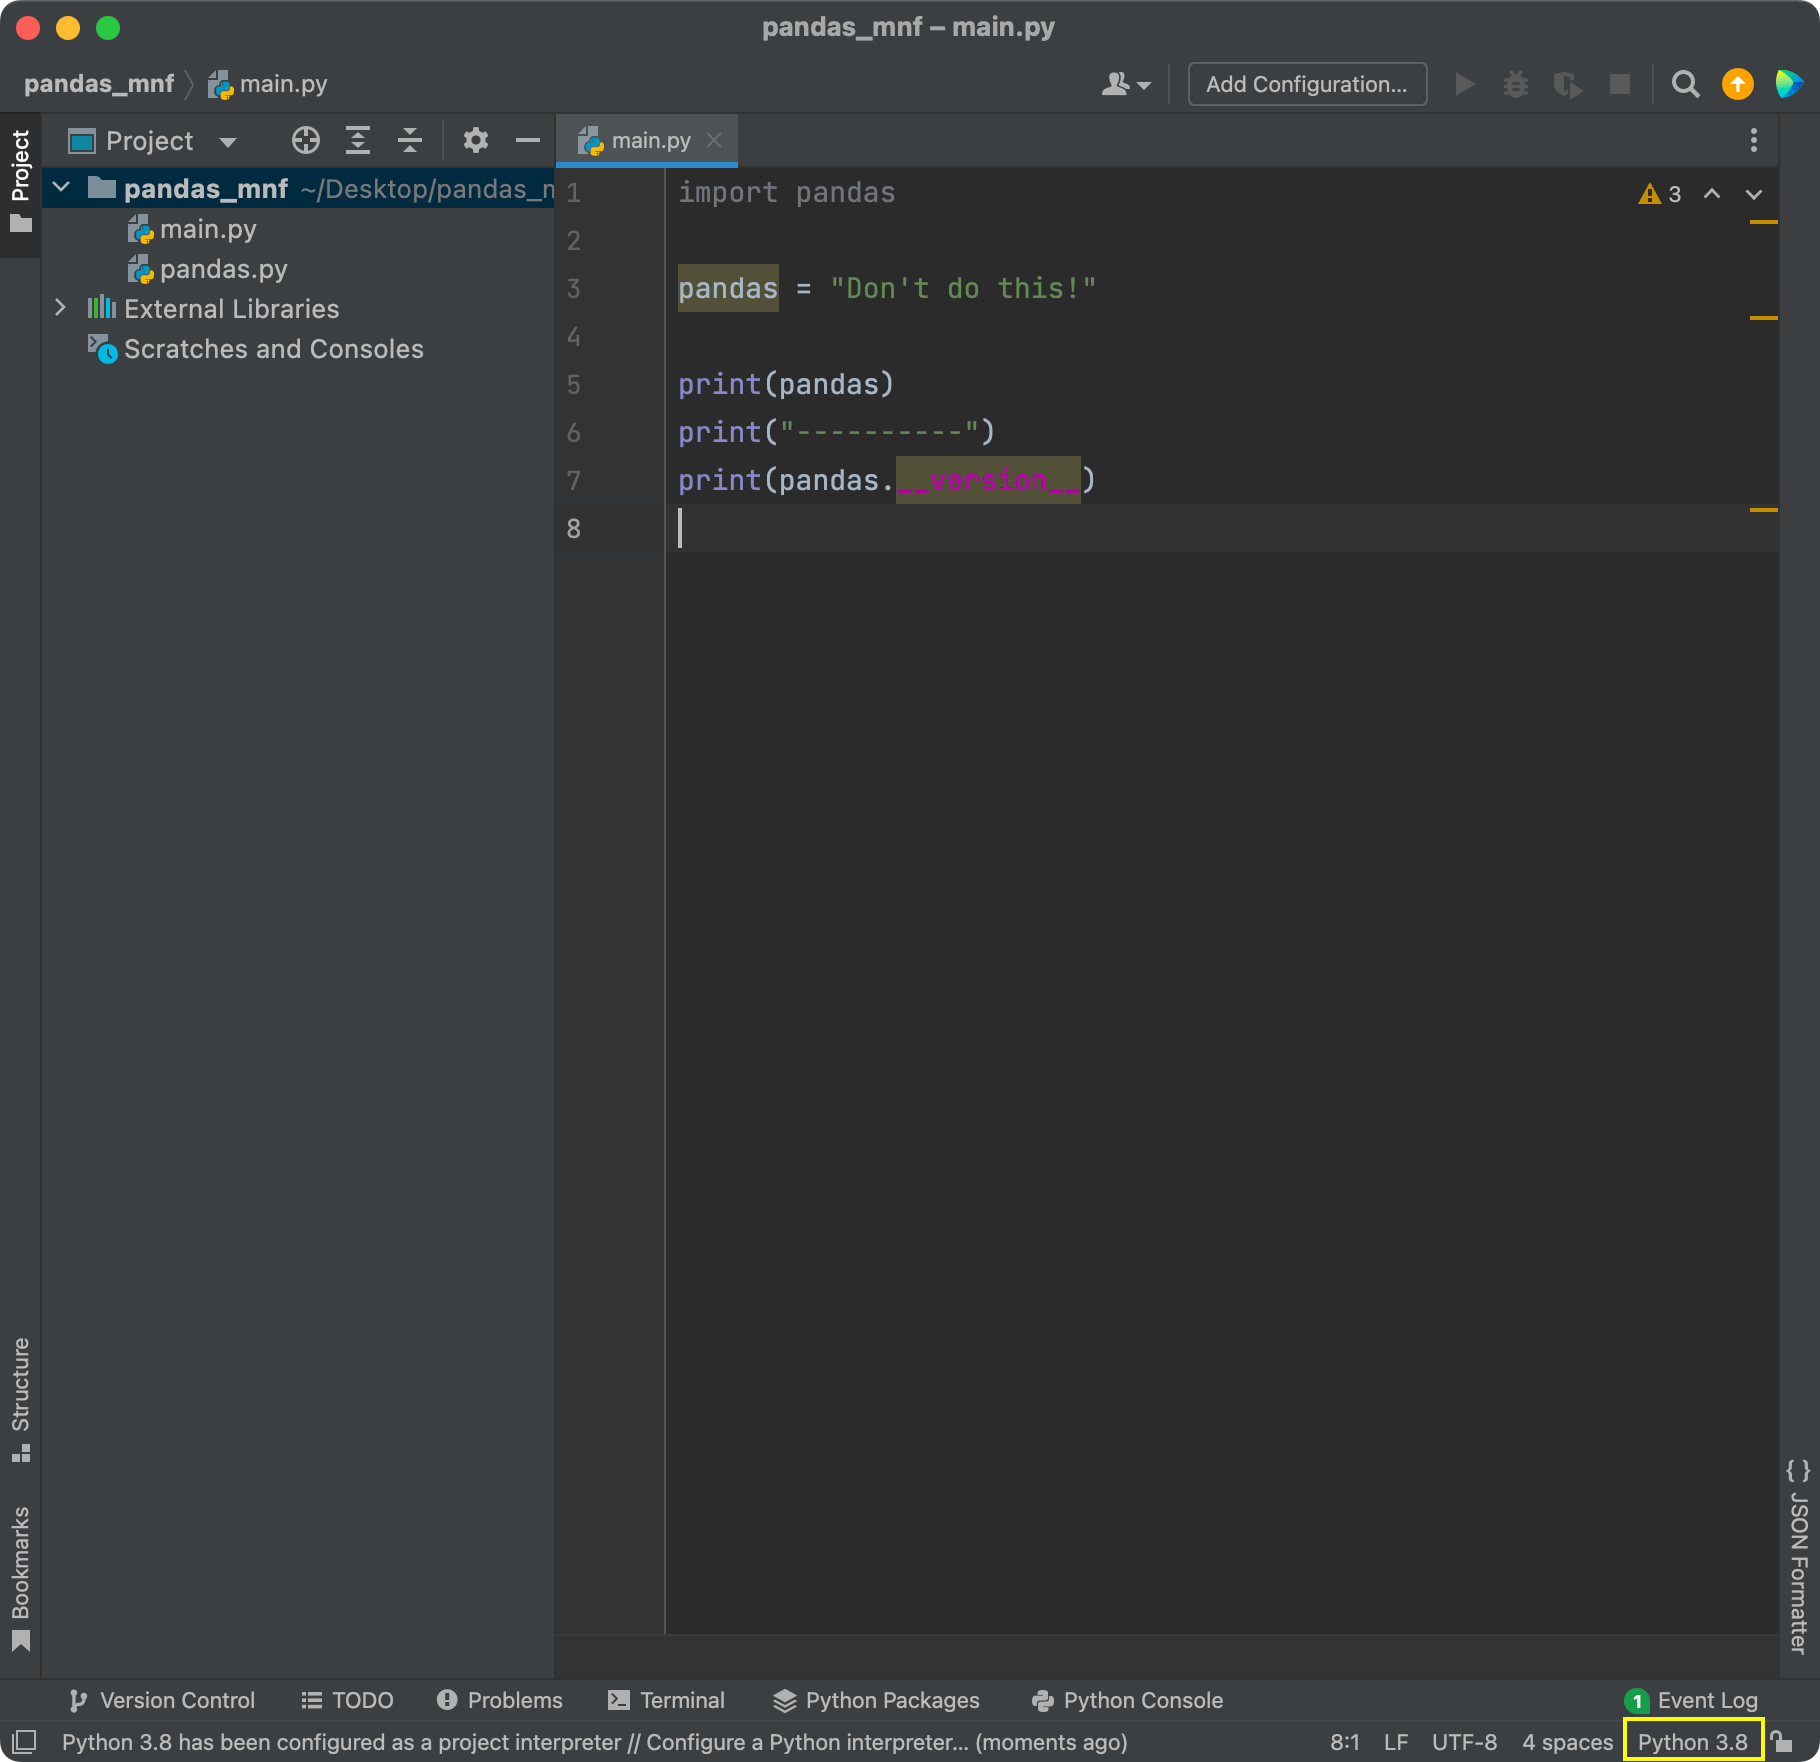 Image 6 - PyCharm solution (Image by author)